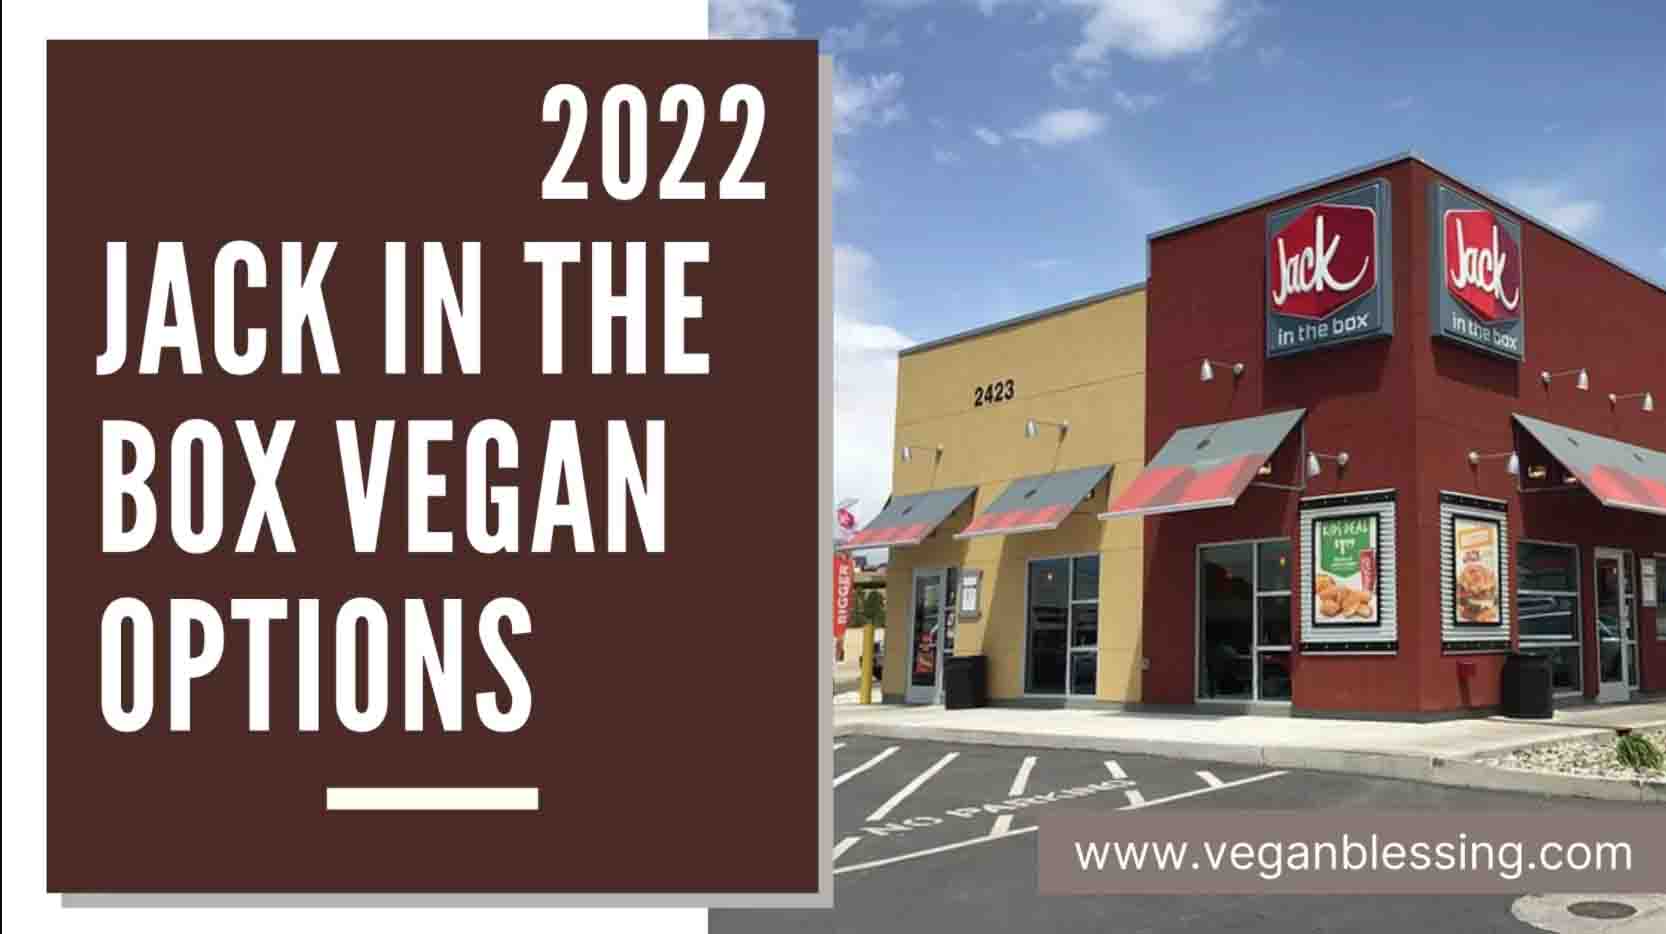 [2022] Jack in The Box Vegan Options (Avoid these options) Jack in the box vegan option in 2022